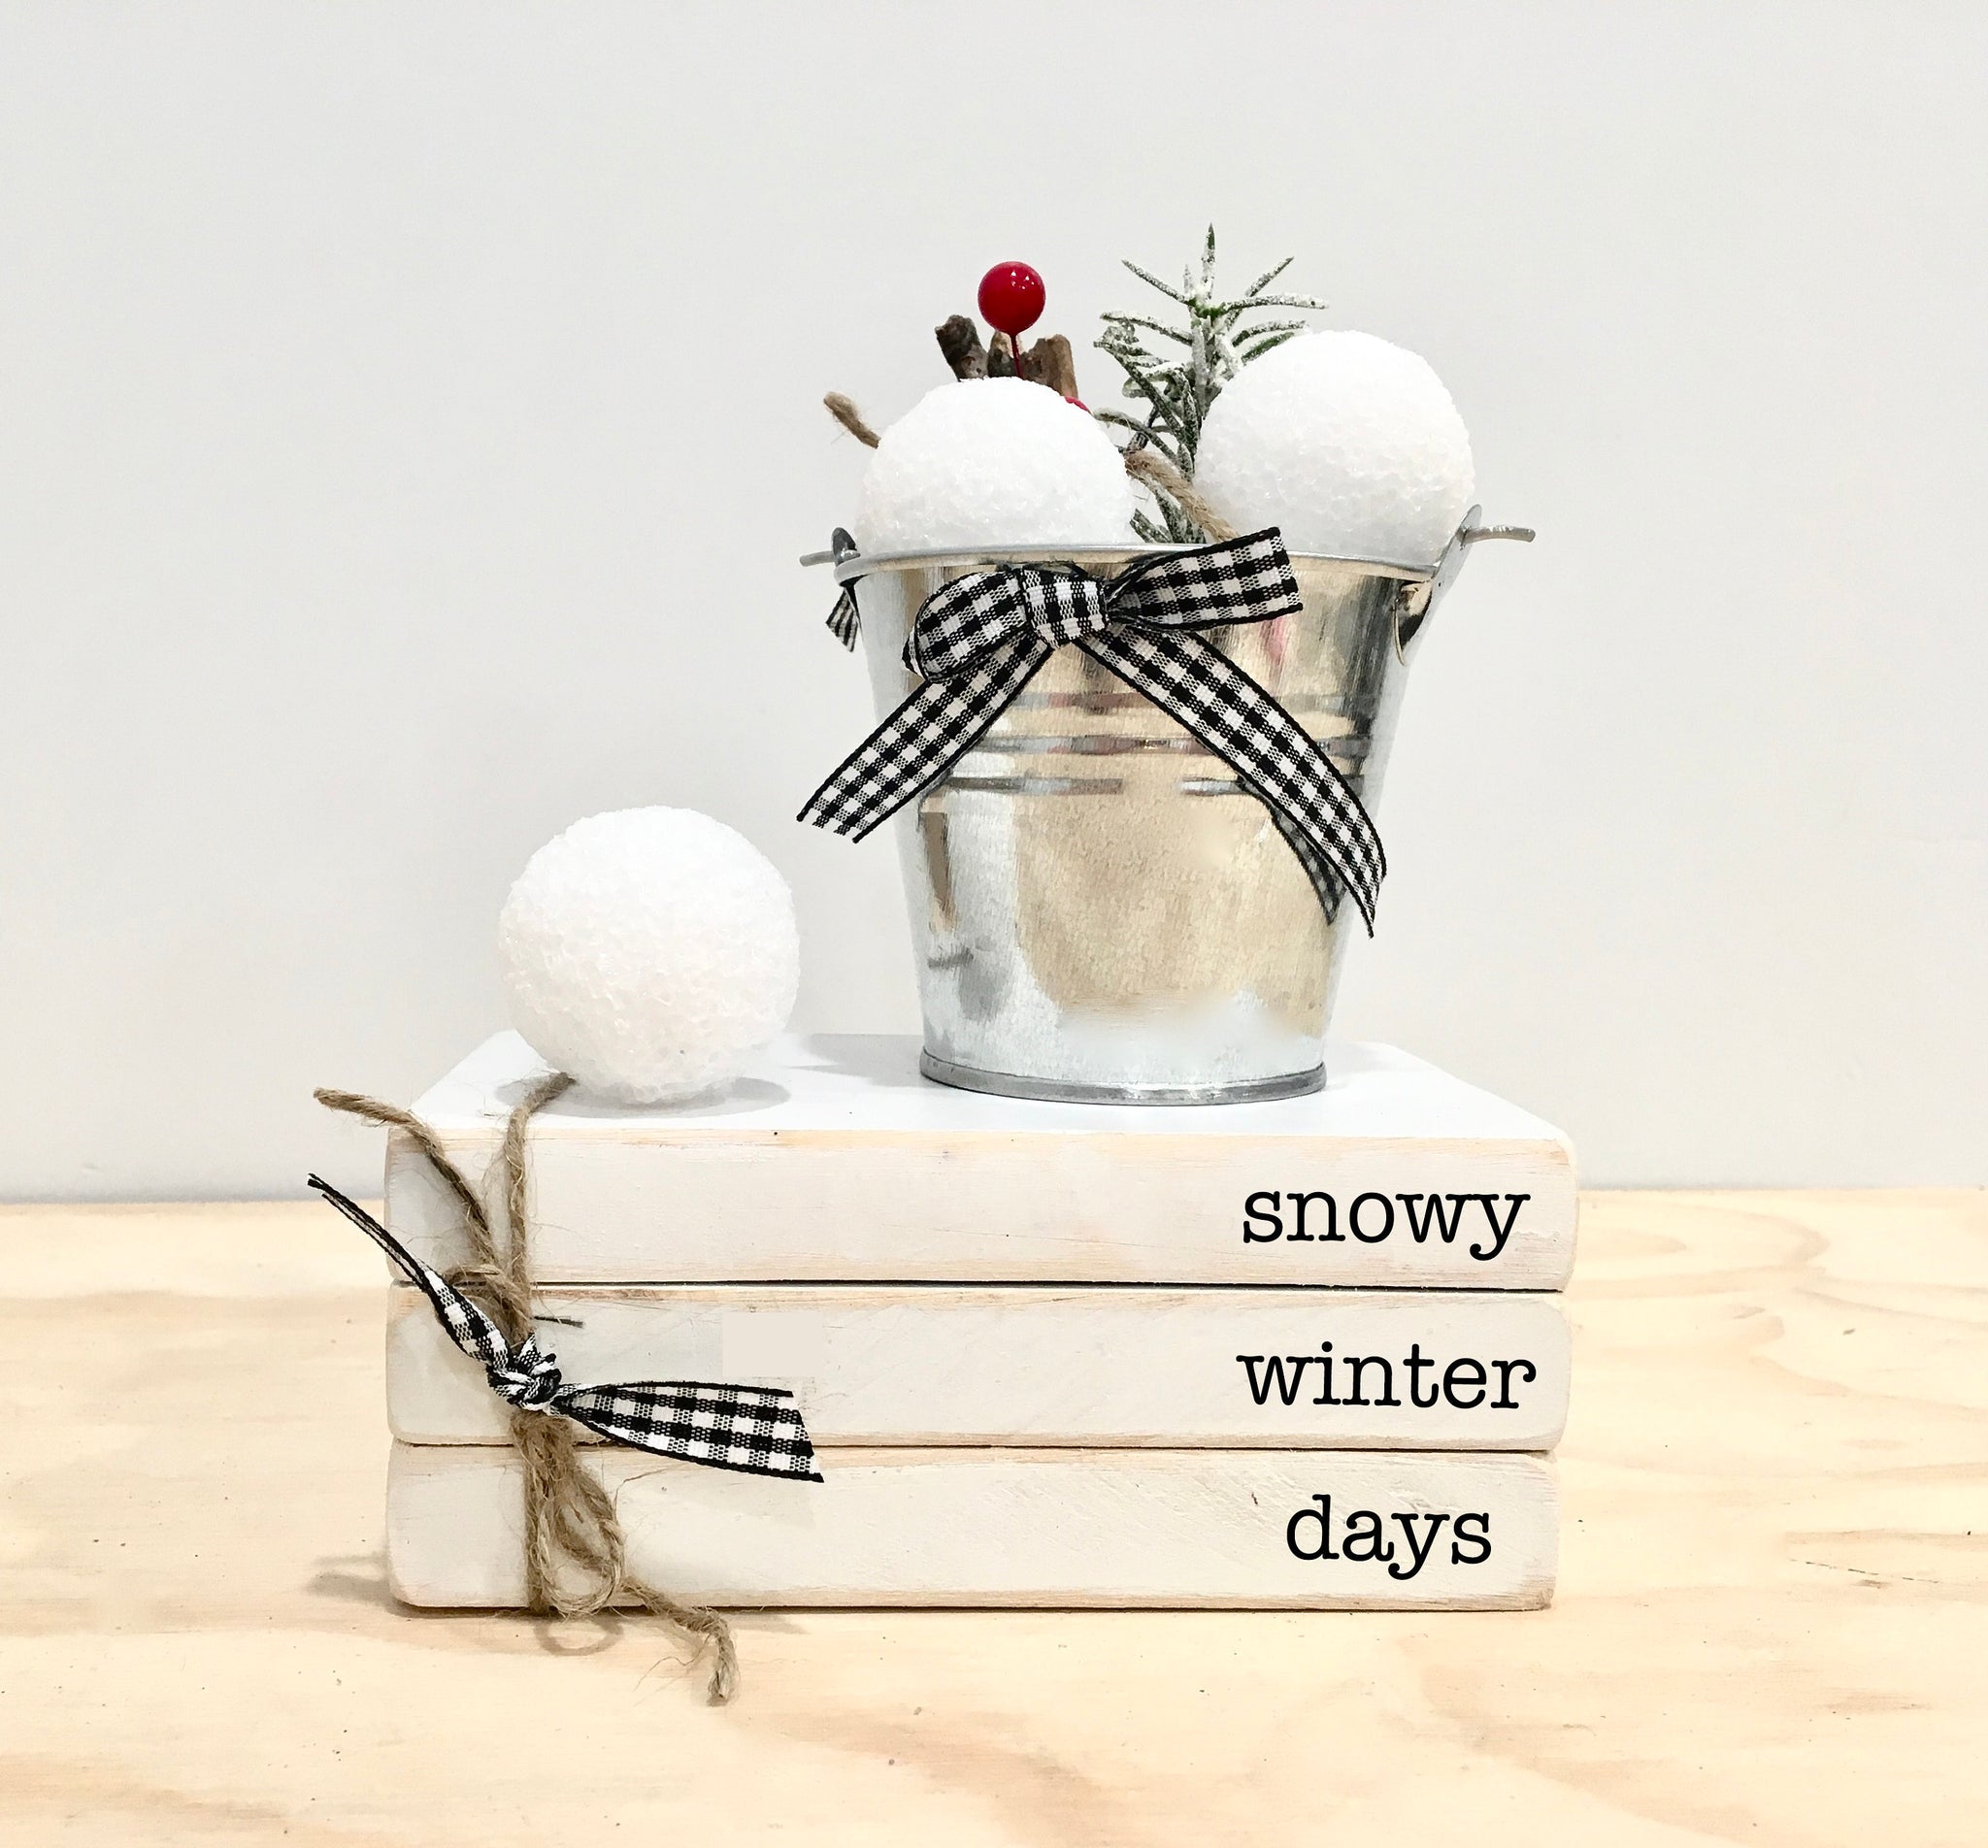 Winter tiered tray, Tiered tray books, Snowball bucket, Tiered tray decor, Mini book stack, Winter decor, hot cocoa bar, Faux snowballs